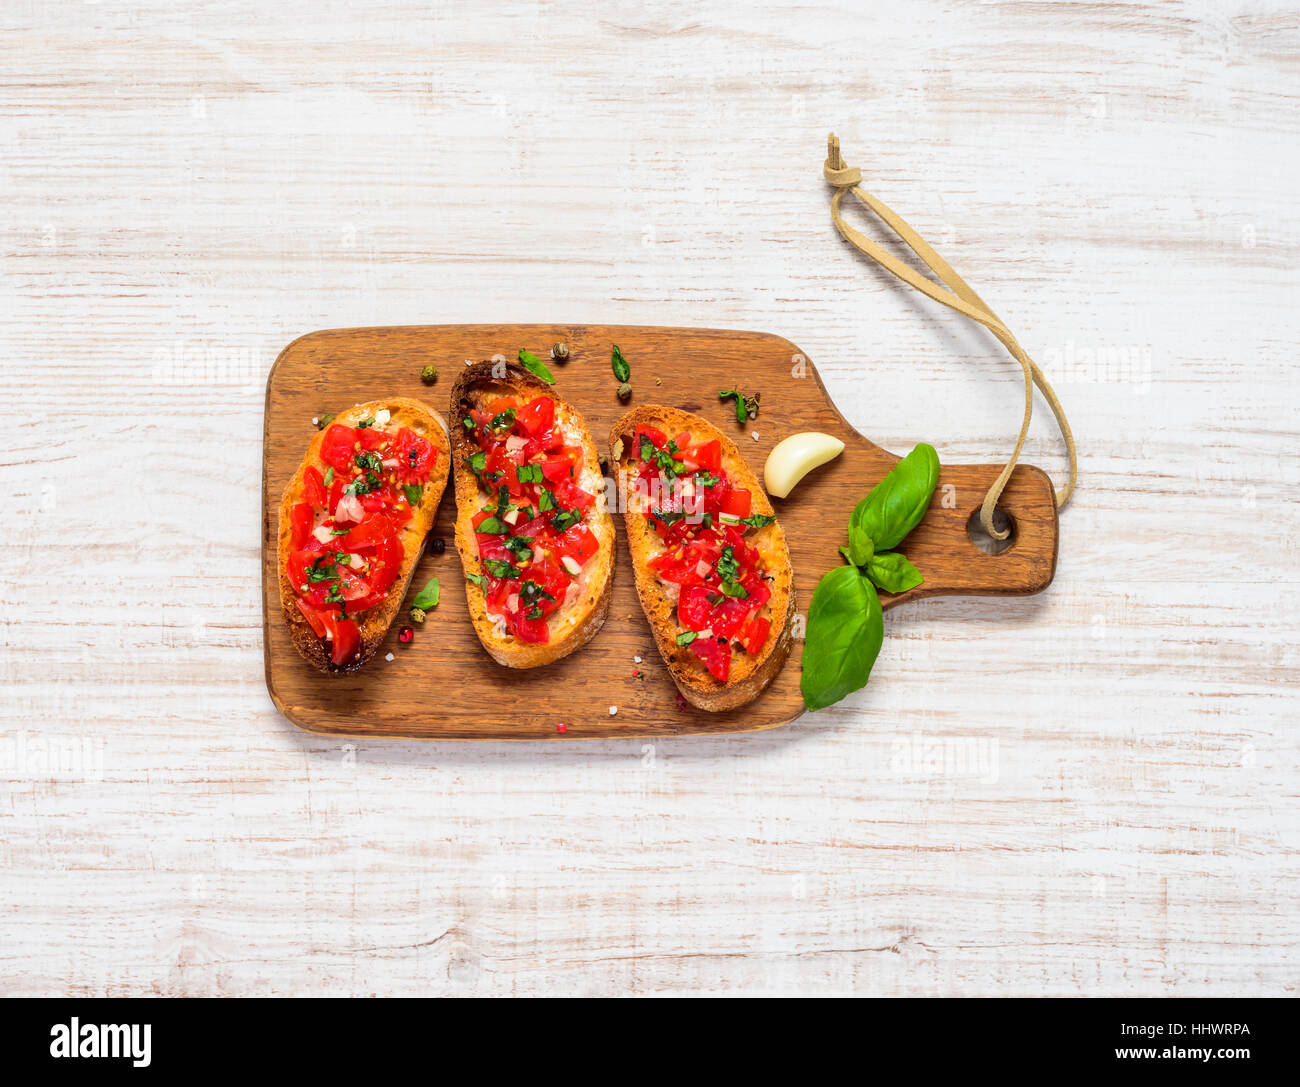 Antipasto Bruschetta with Grilled Bread, Tomato and Basil on Wooden Chopping Board Stock Photo